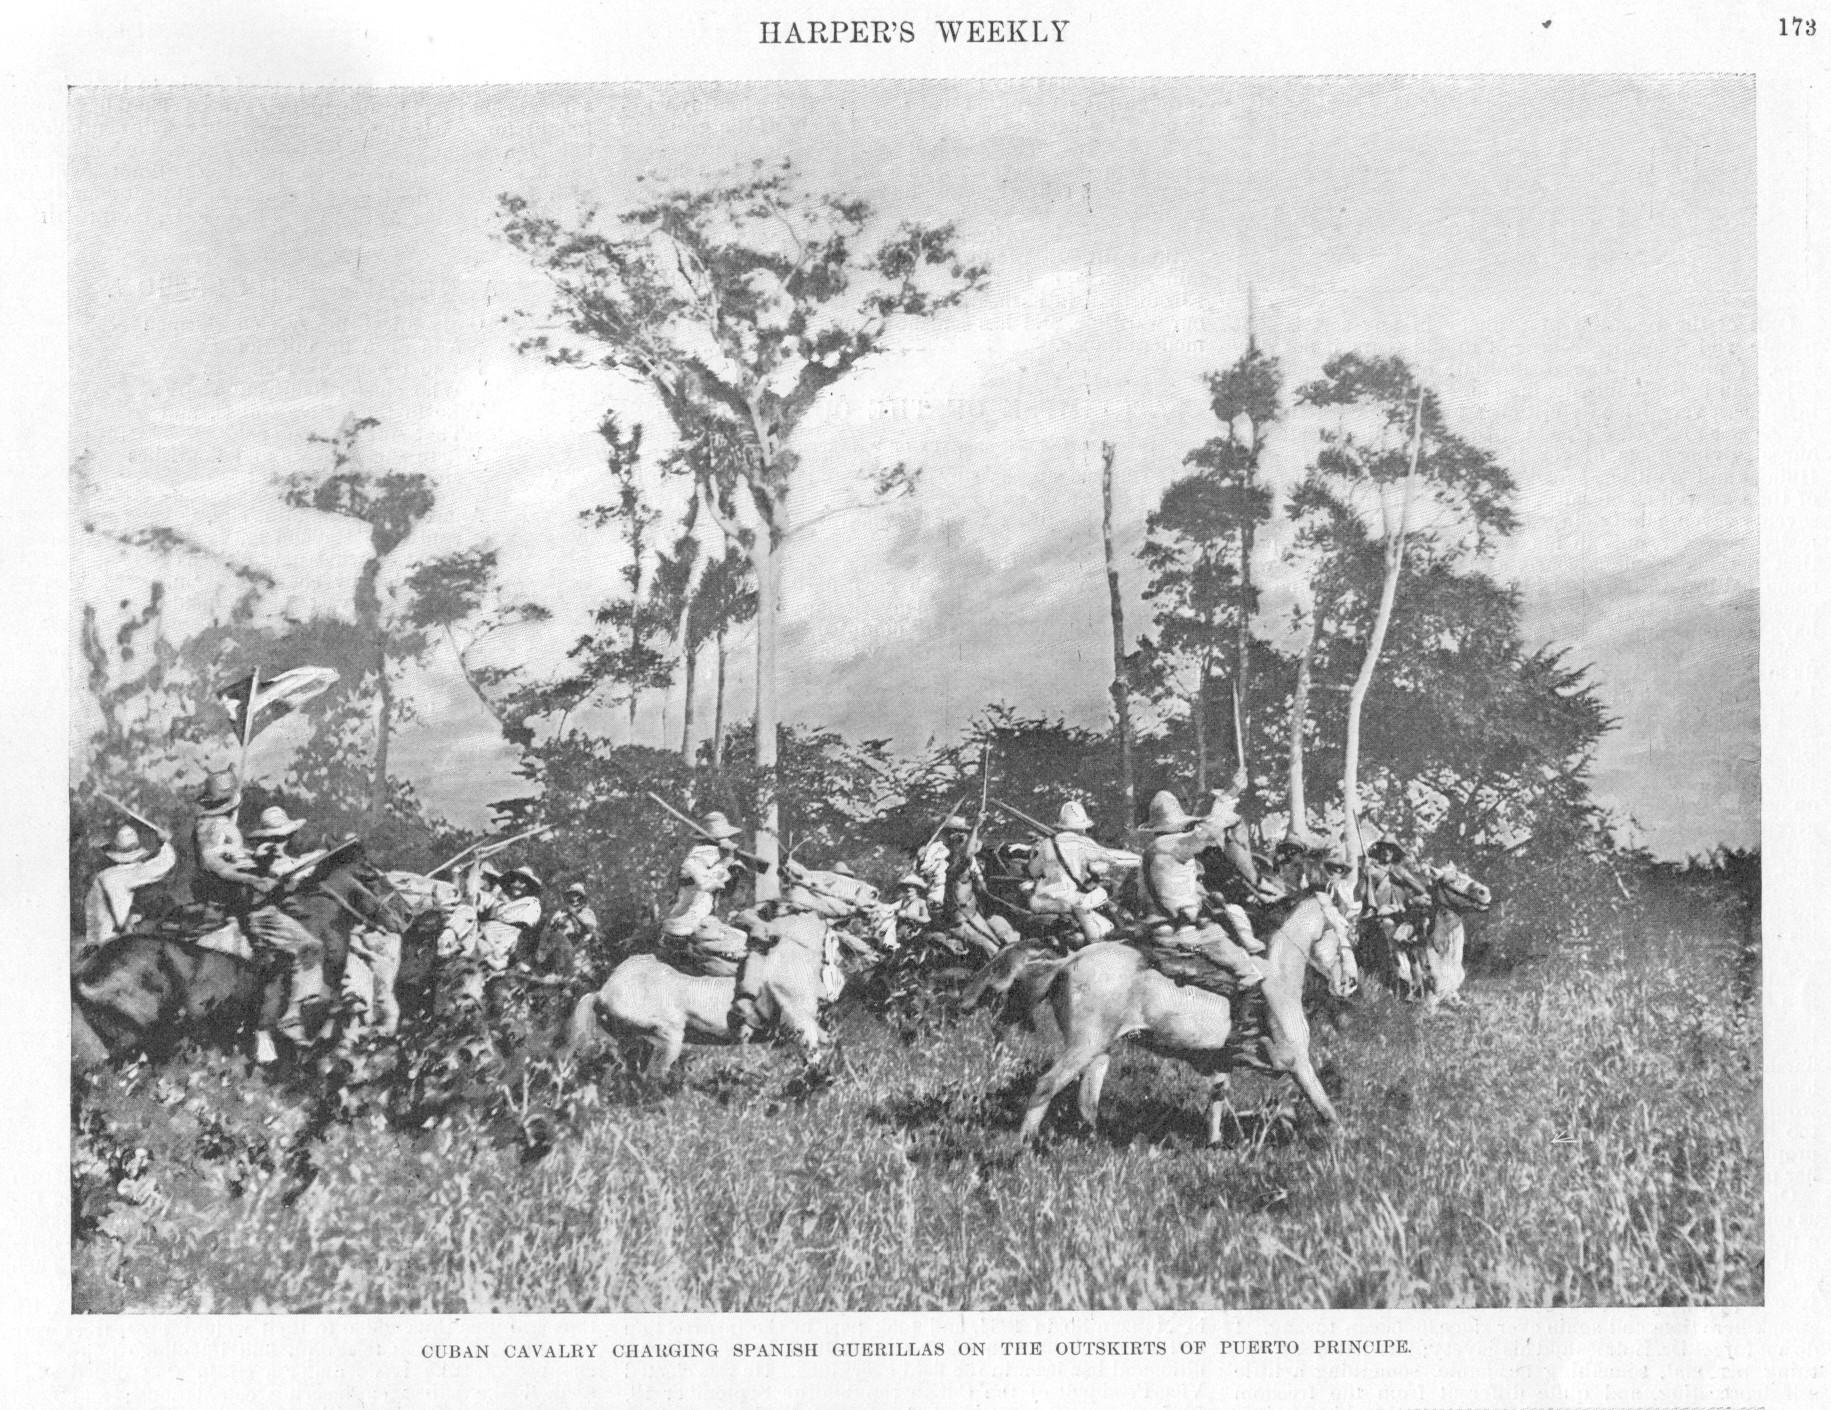 CUBAN CAVALRY CHARGING SPANISH GUERILLAS ON THE OUTSKIRTS OF PUERTO PRINCIPE.